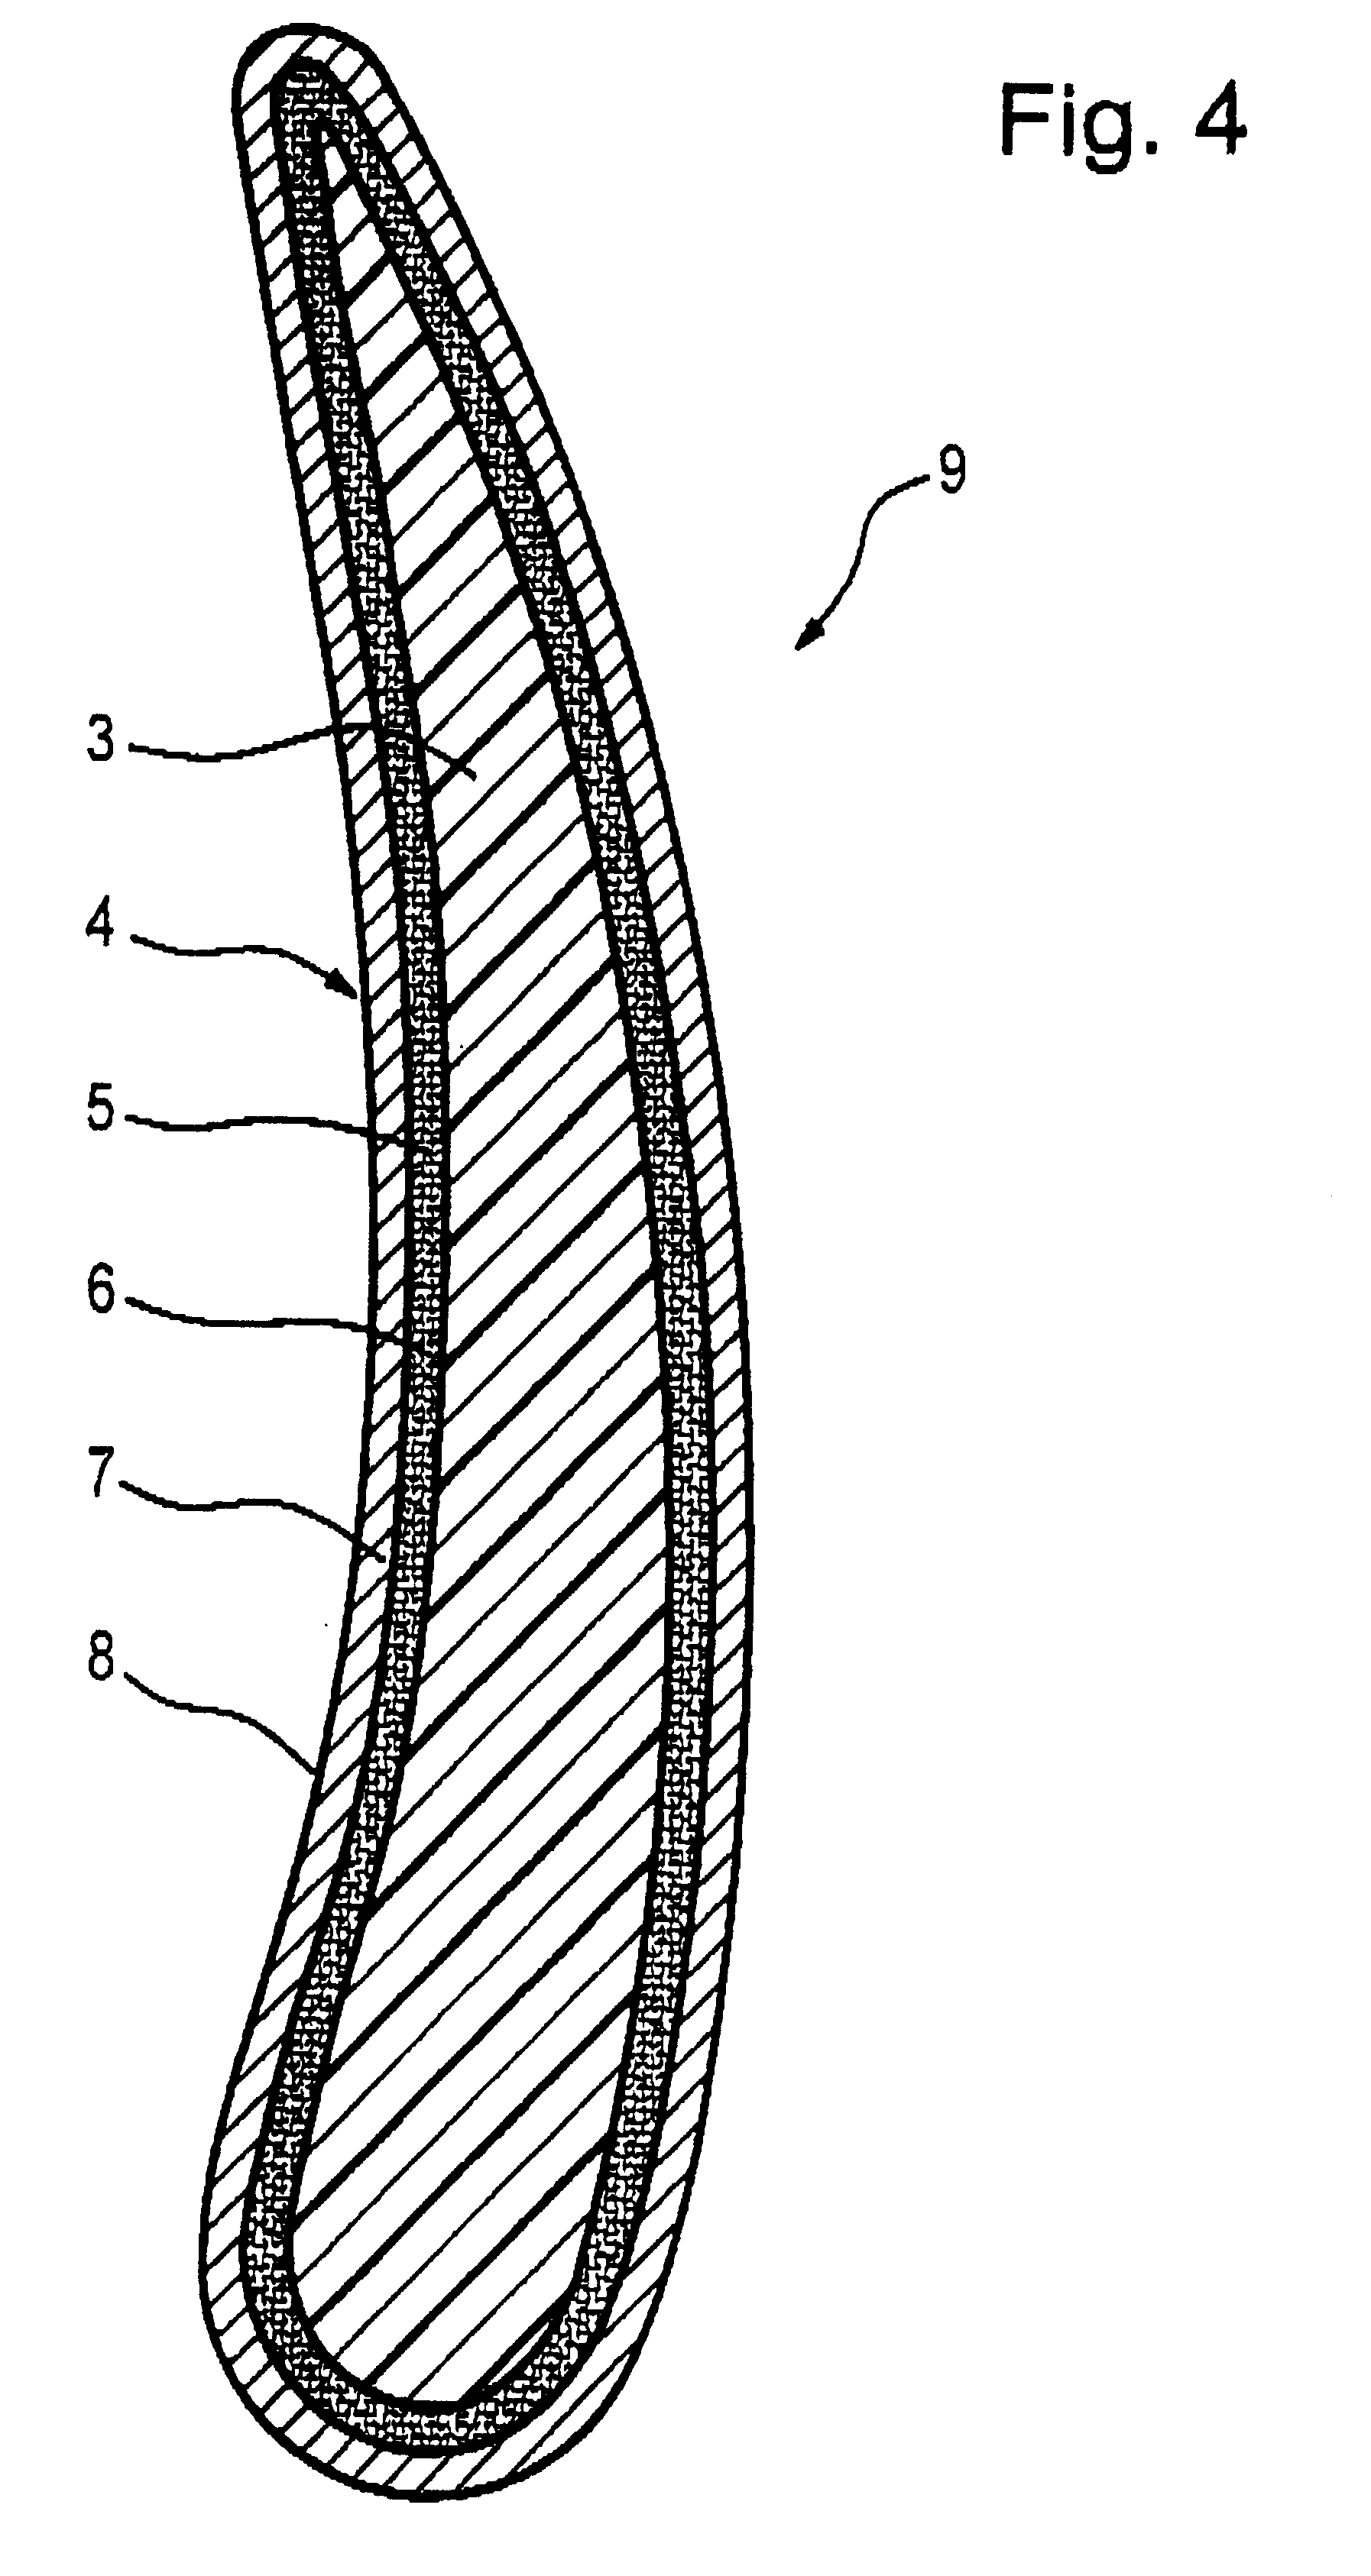 Layer structure including metallic cover layer and fiber-reinforced composite substrate, and a method of making the same